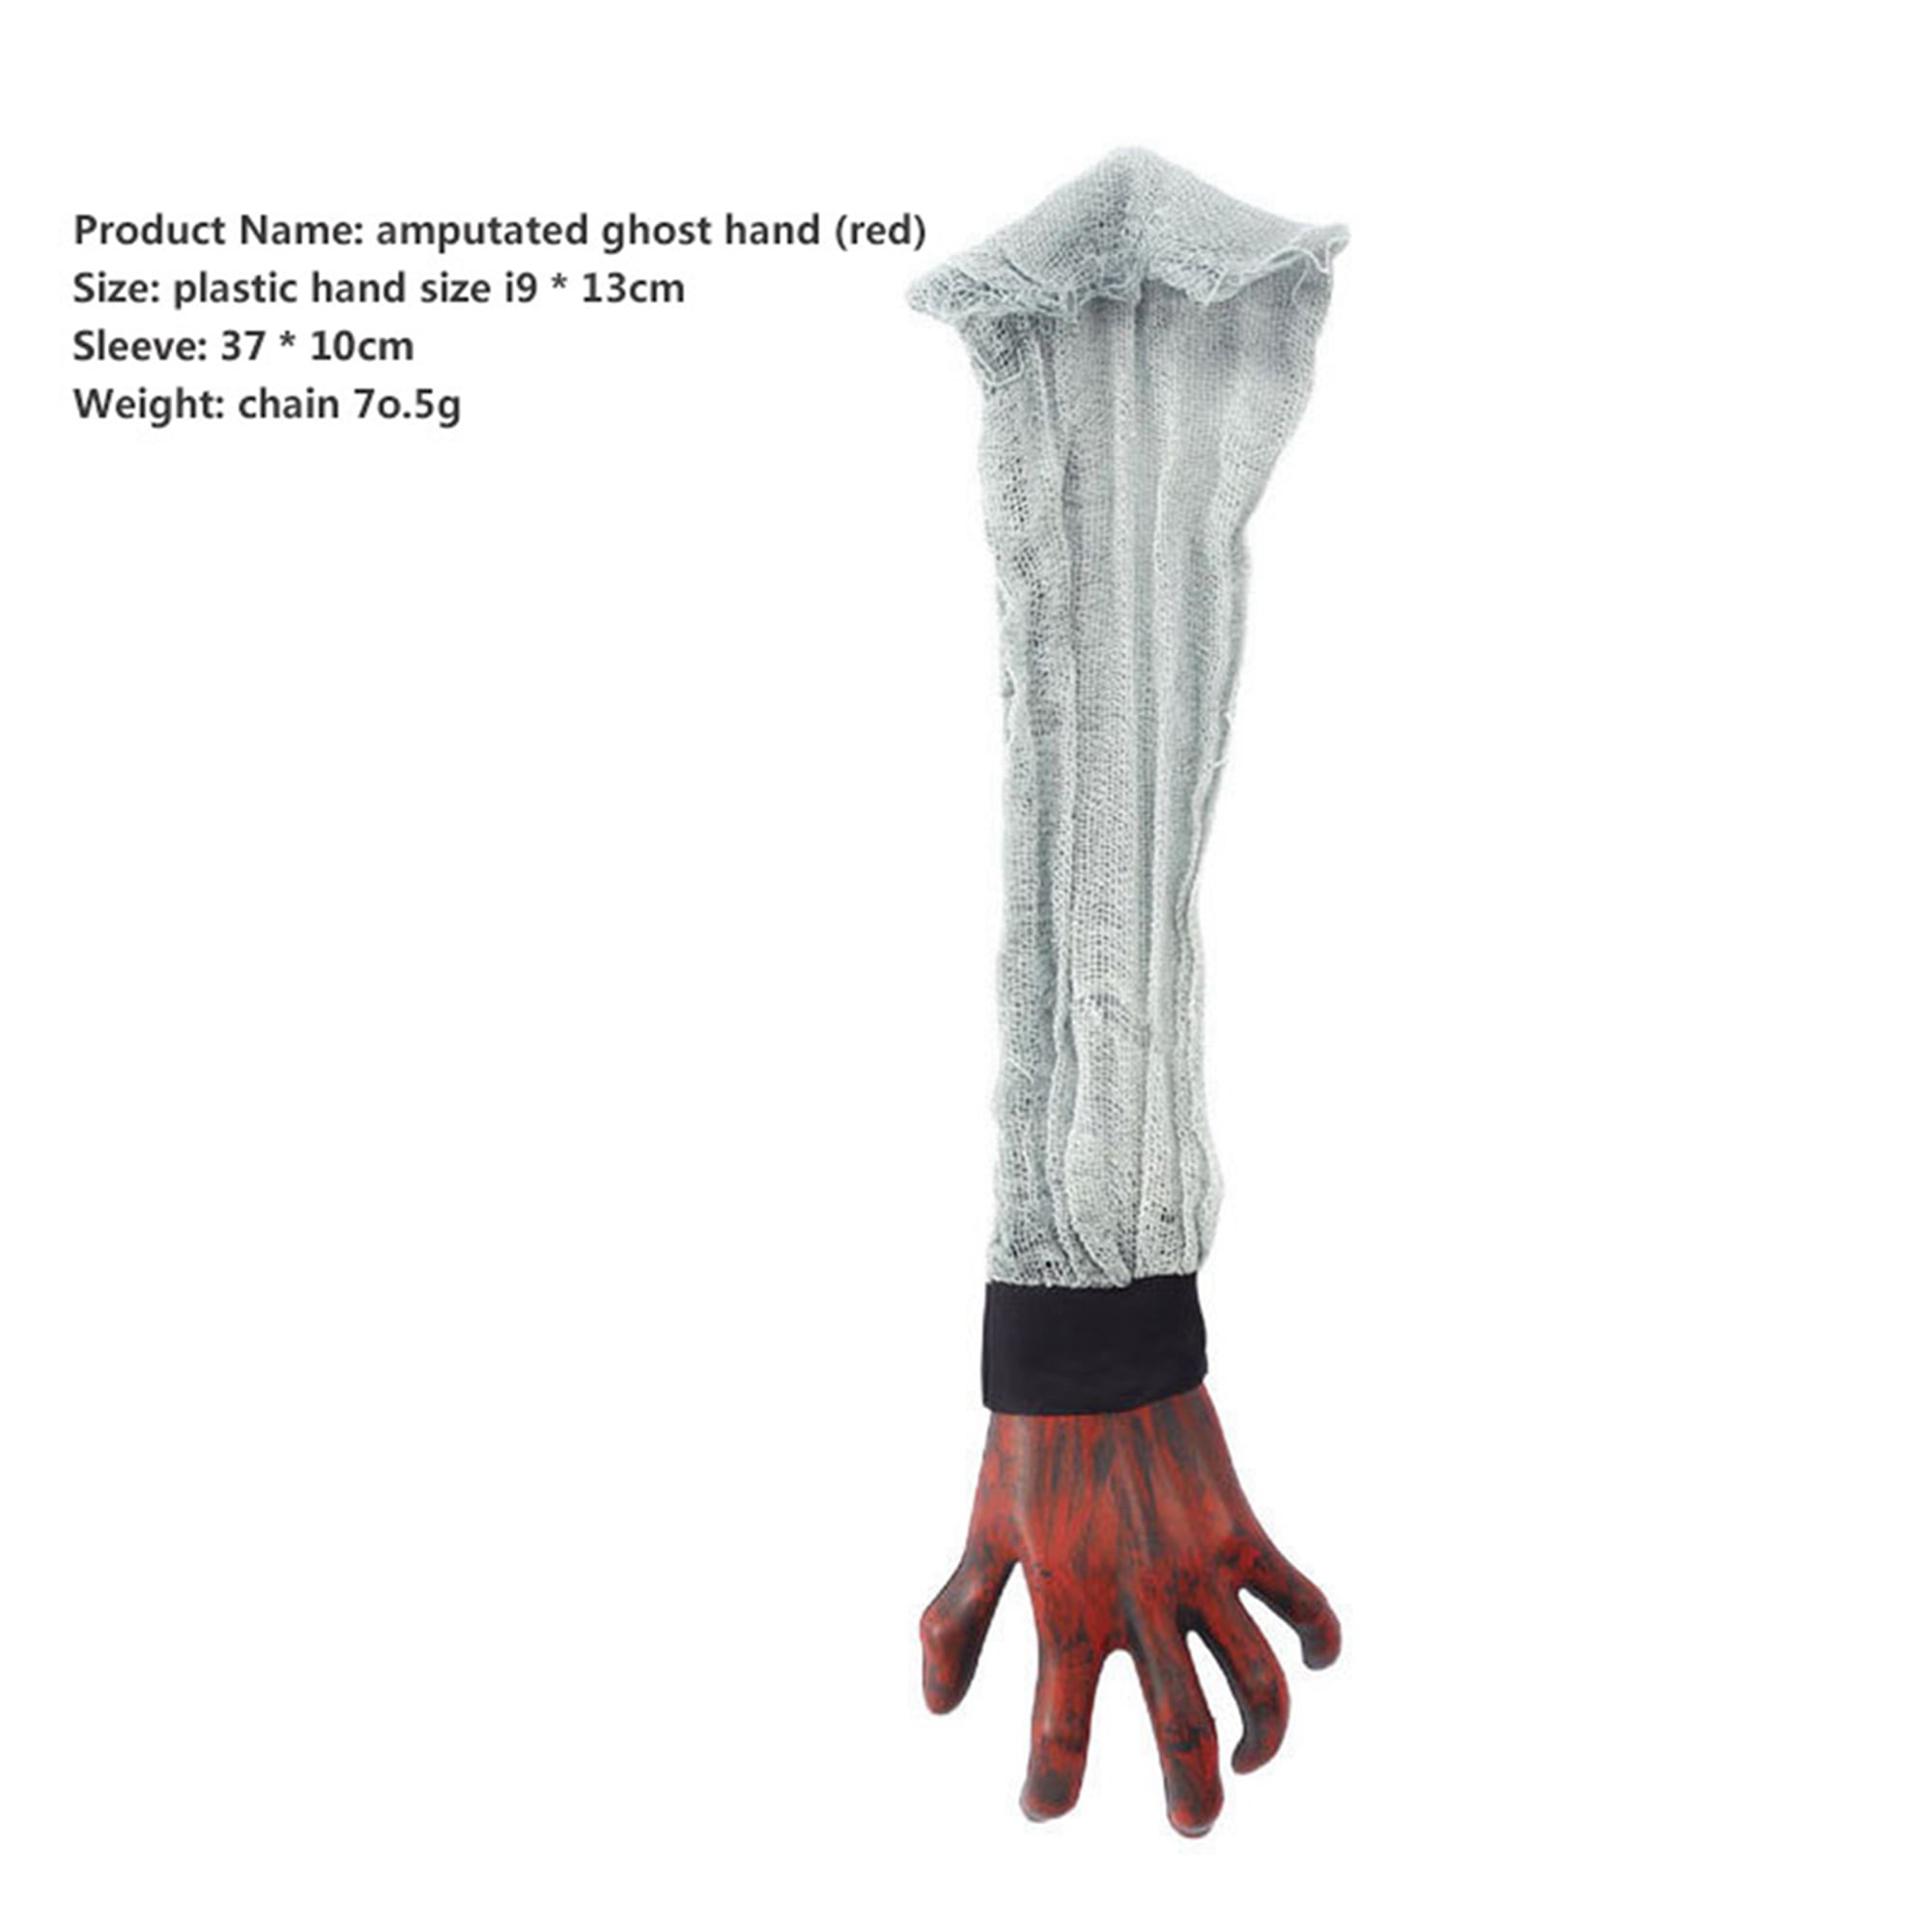 HALLOWEEN LIFE SIZE SEVERED BODY PARTS PROP BLOODY FAKE ARM PROP FANCY DRESS 